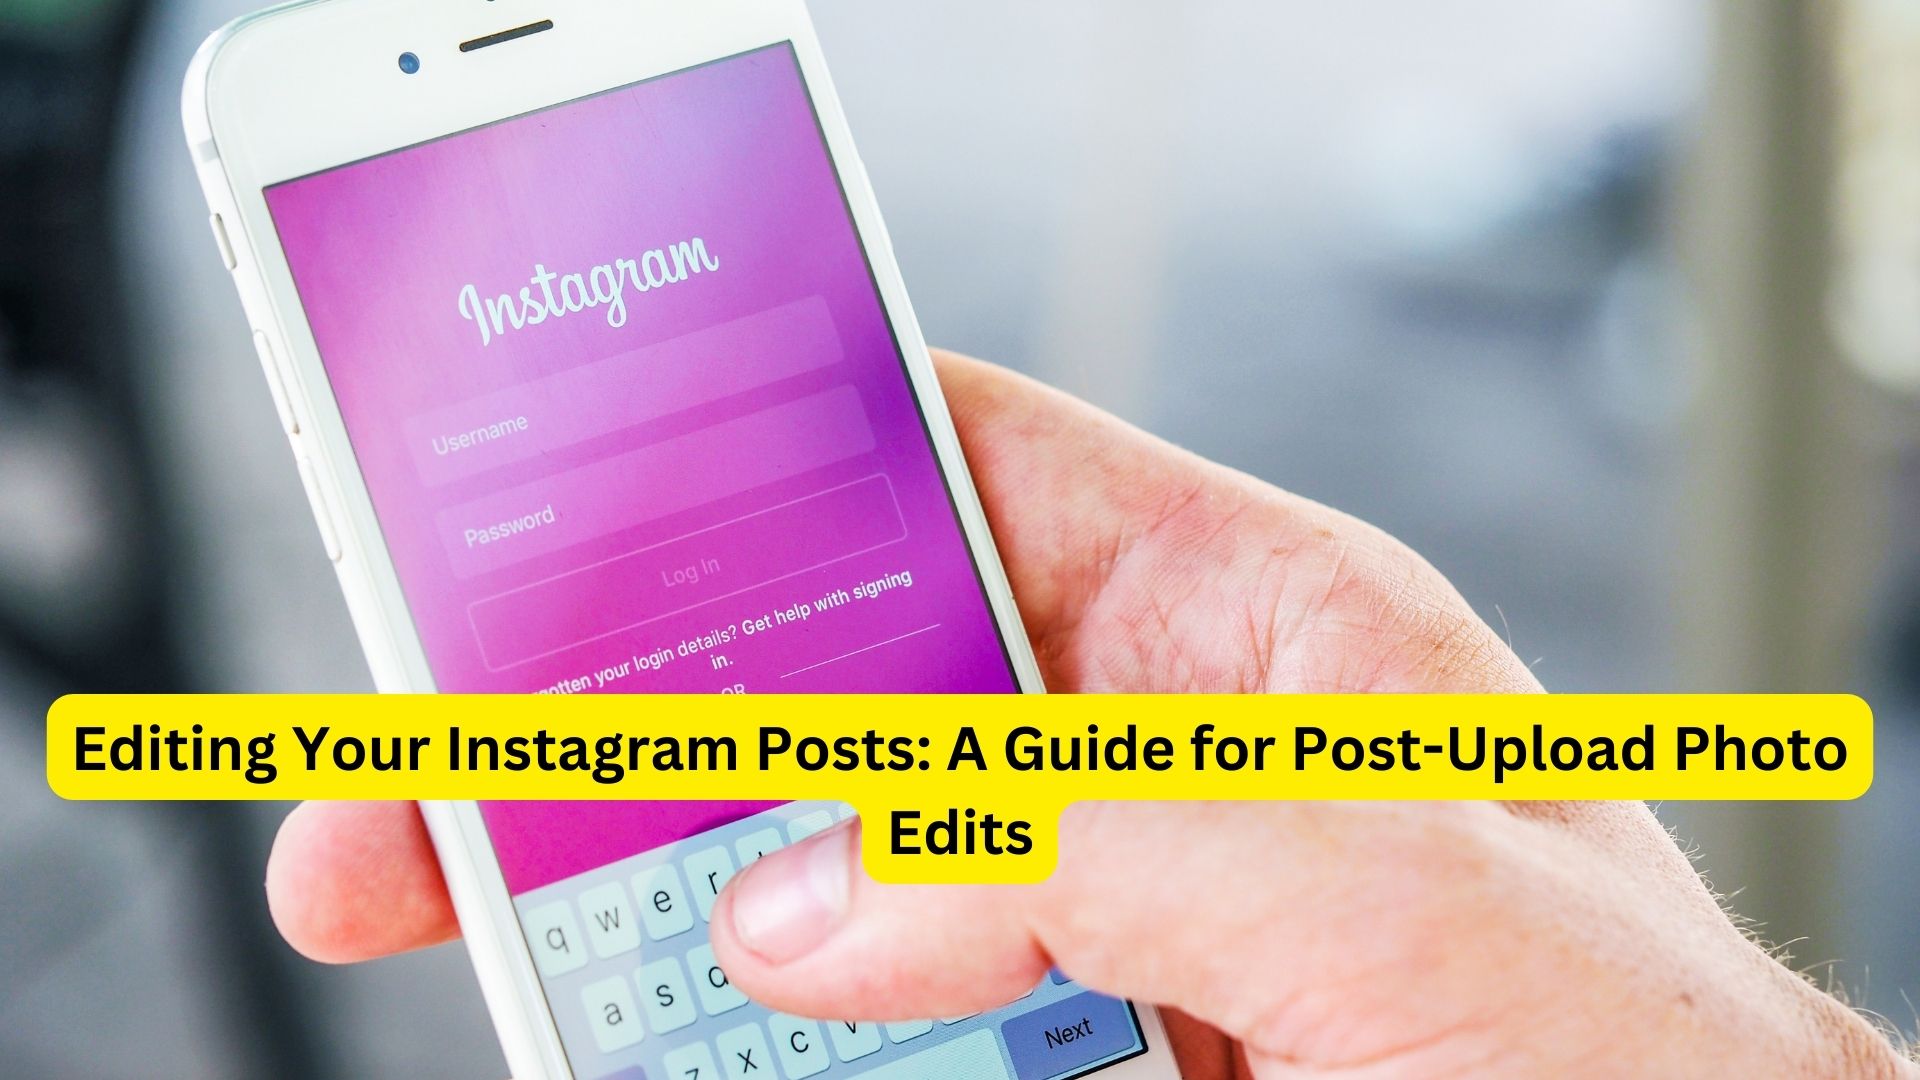 Editing Your Instagram Posts: A Guide for Post-Upload Photo Edits